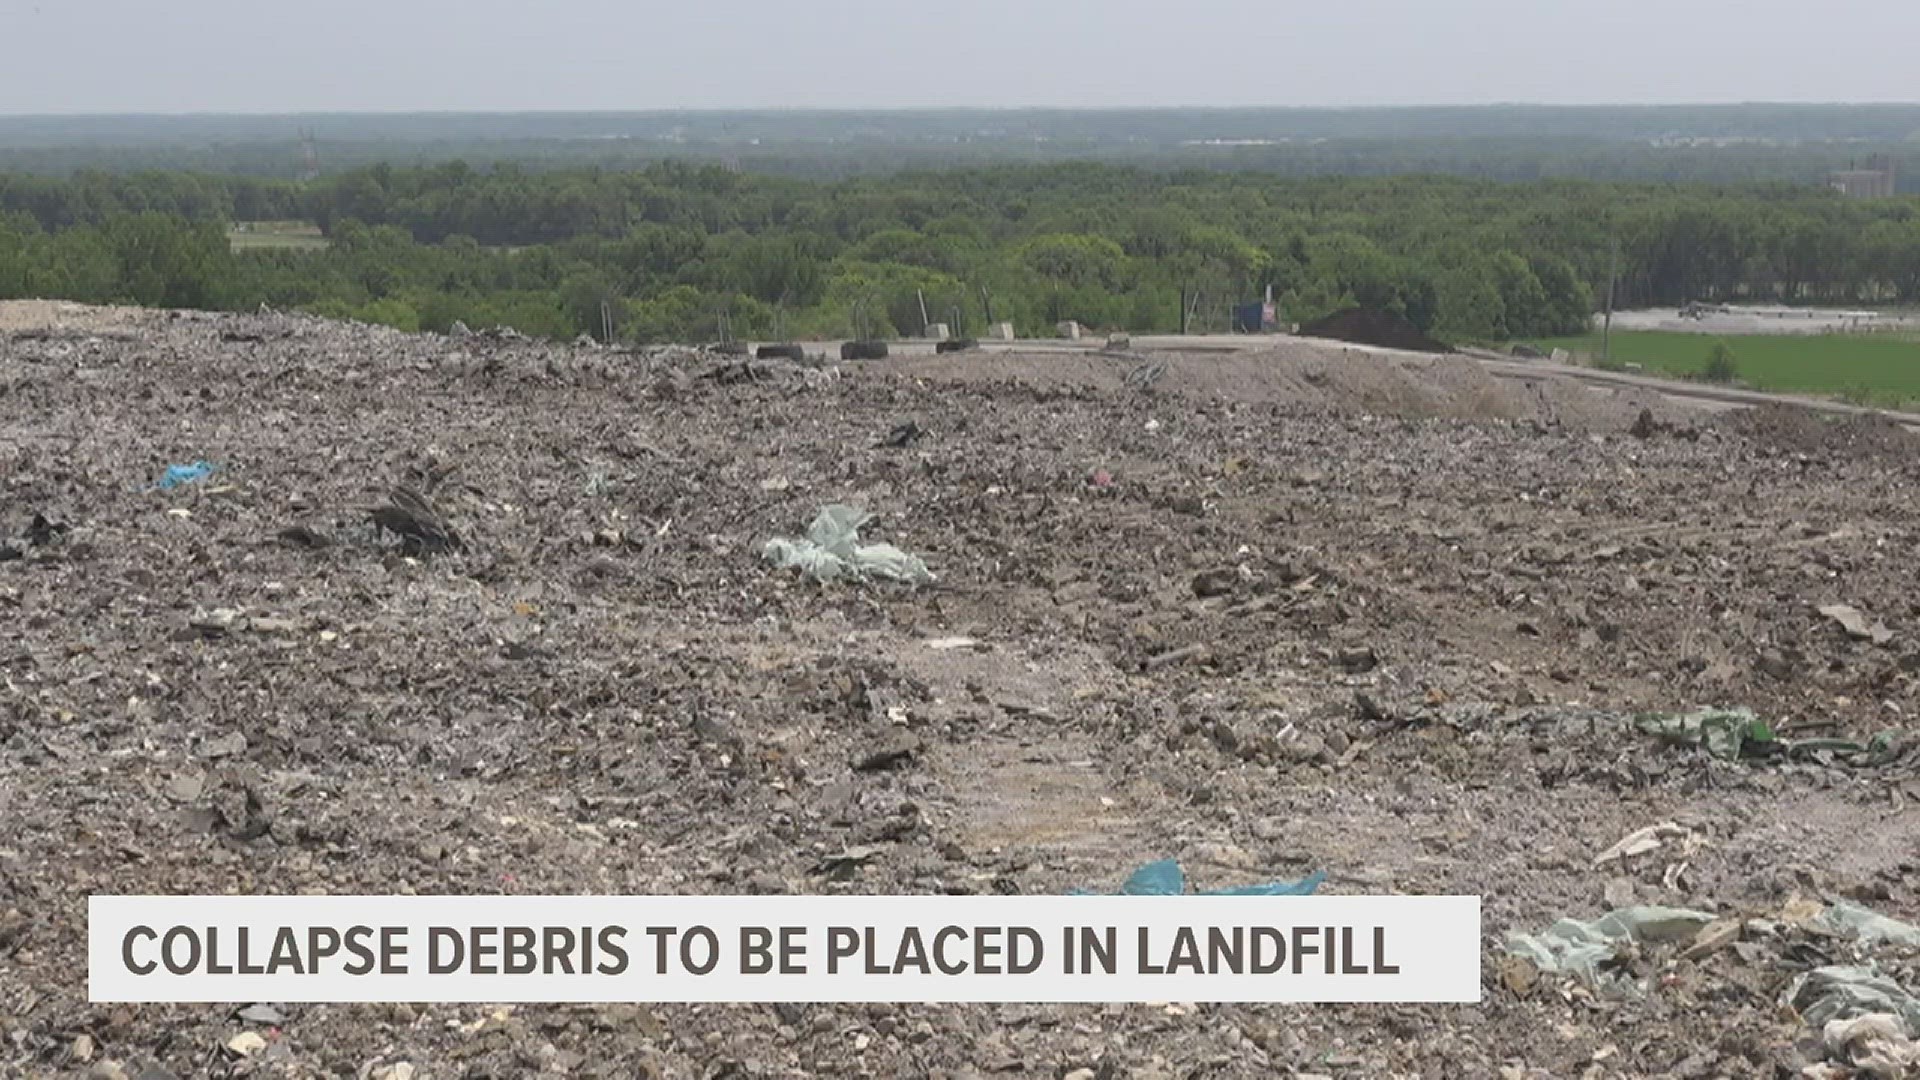 The 22 million pounds of rubble will be put into one giant hole at the landfill on Monday, four weeks after the partial collapse of the downtown Davenport building.